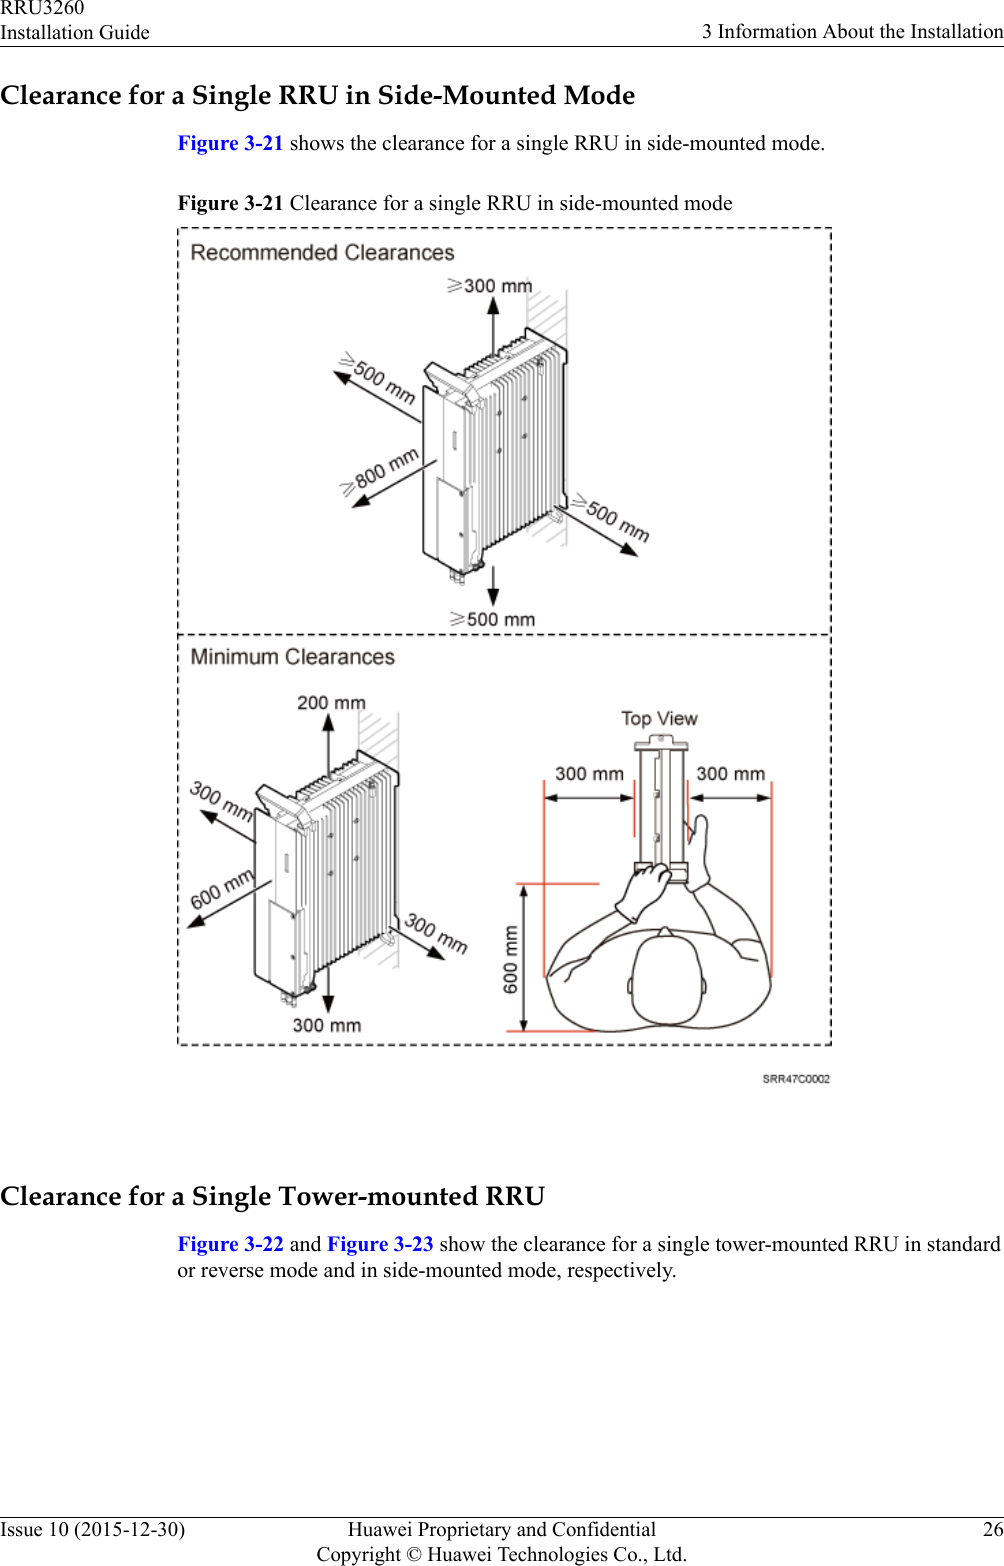 Clearance for a Single RRU in Side-Mounted ModeFigure 3-21 shows the clearance for a single RRU in side-mounted mode.Figure 3-21 Clearance for a single RRU in side-mounted mode Clearance for a Single Tower-mounted RRUFigure 3-22 and Figure 3-23 show the clearance for a single tower-mounted RRU in standardor reverse mode and in side-mounted mode, respectively.RRU3260Installation Guide 3 Information About the InstallationIssue 10 (2015-12-30) Huawei Proprietary and ConfidentialCopyright © Huawei Technologies Co., Ltd.26